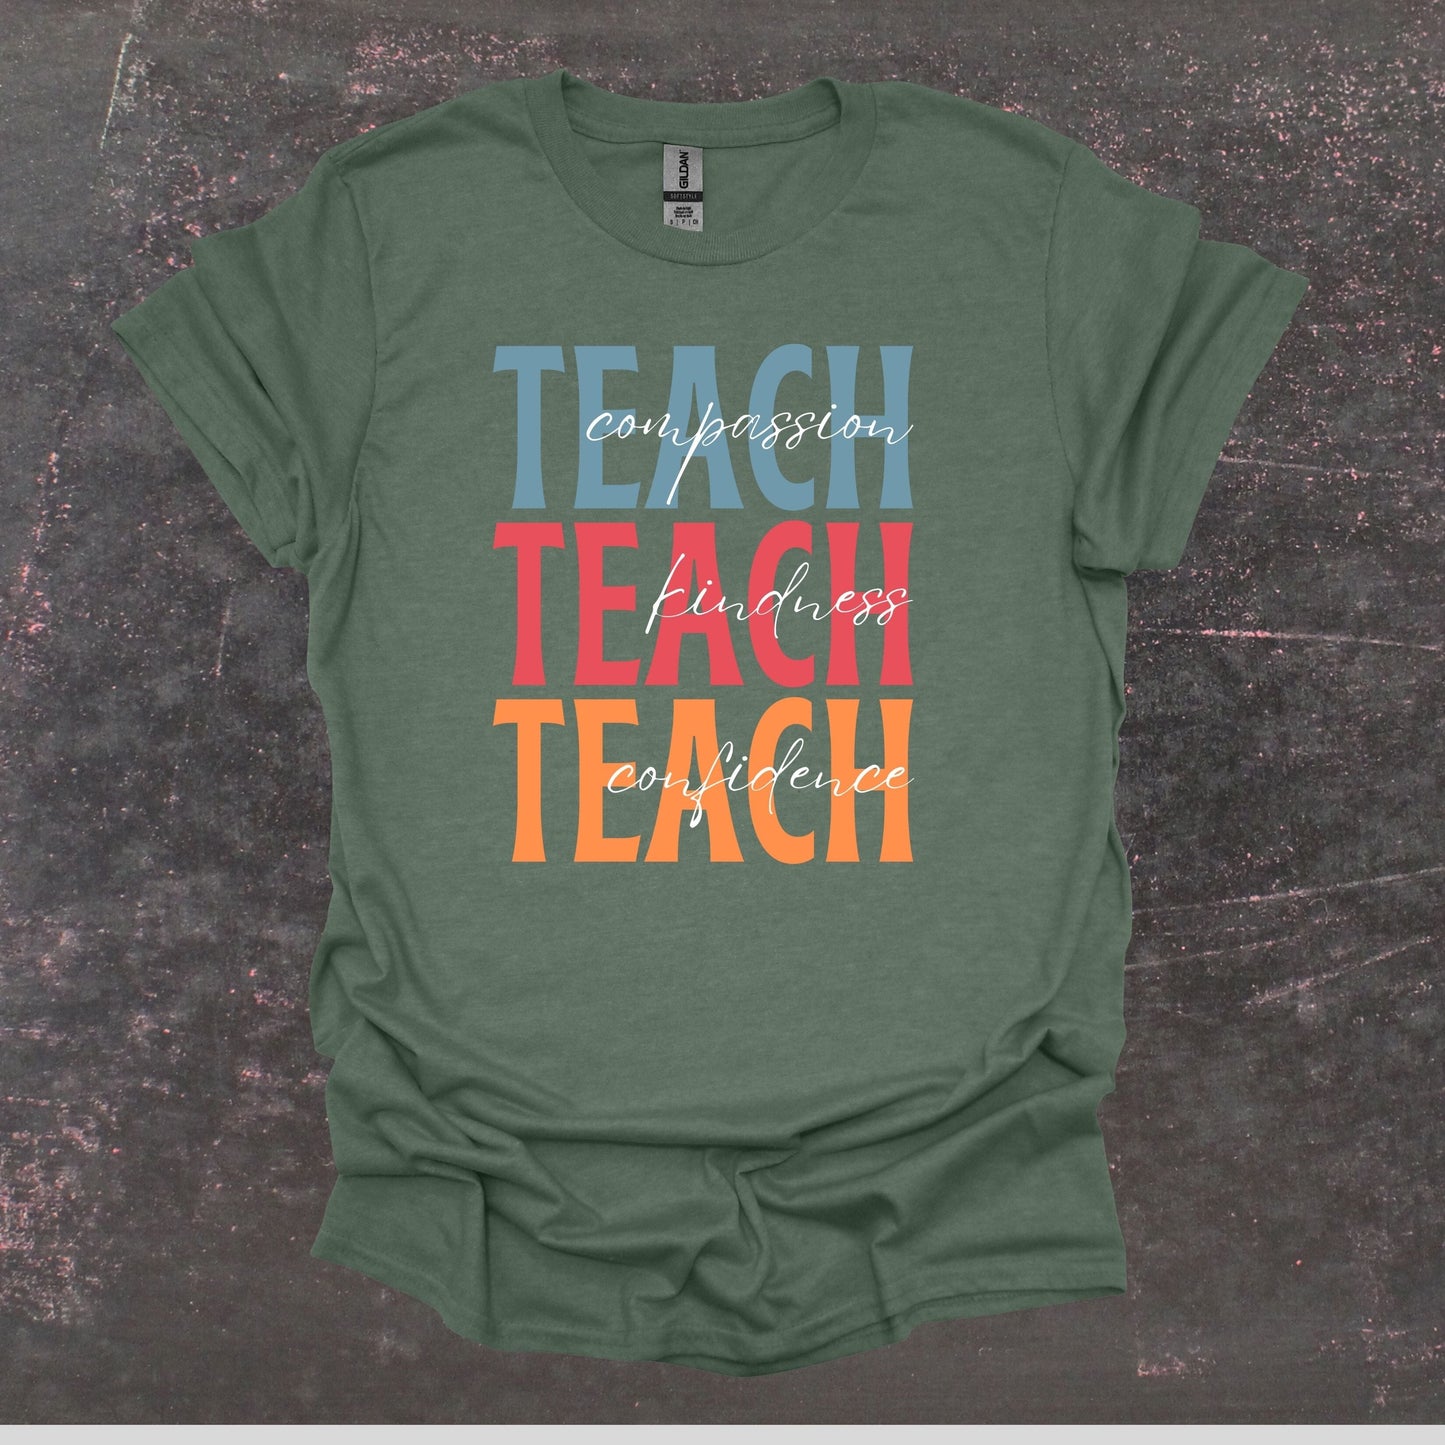 Teach Compassion Kindness Confidence - Teacher T Shirt - Adult Tee Shirts T-Shirts Graphic Avenue Heather Forest Green Adult Small 